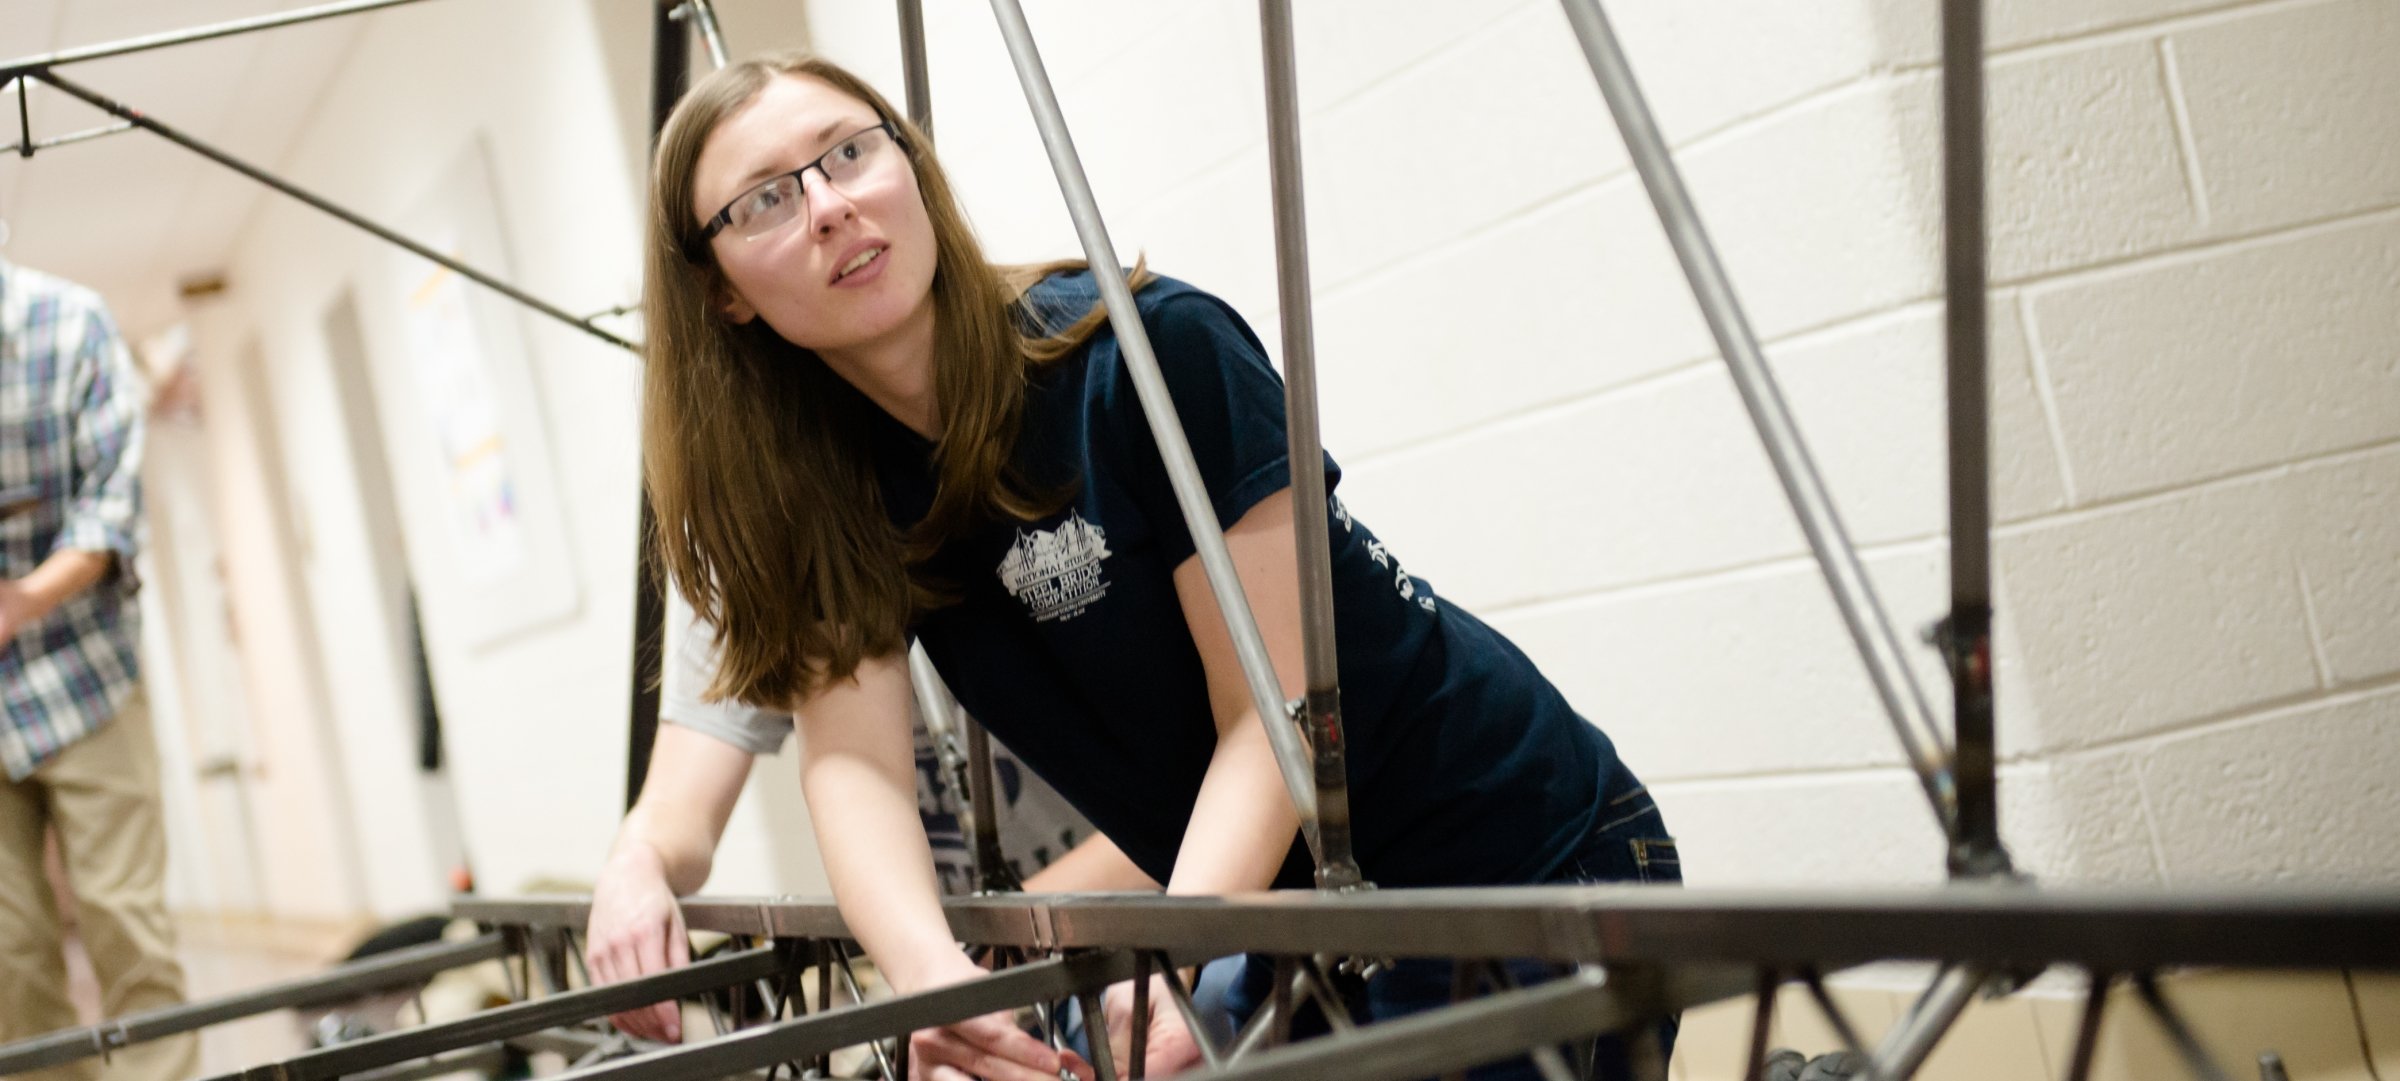 Engineering students working together on a steel bridge.